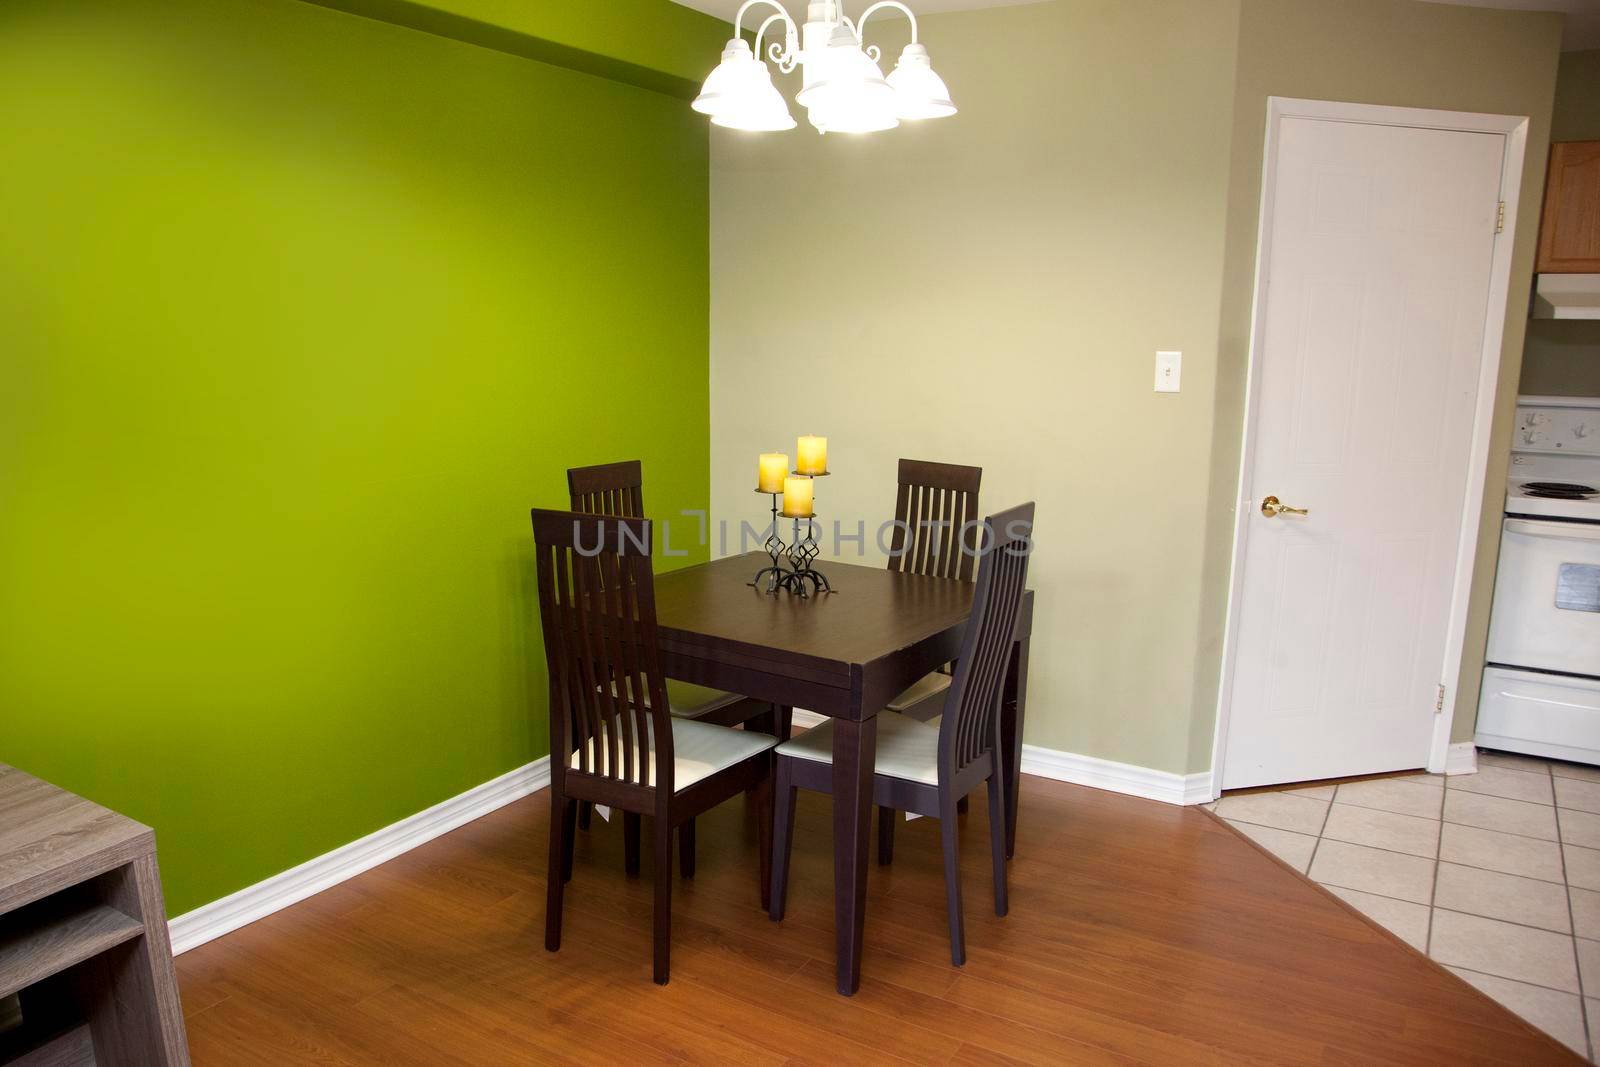 Green walls with a dark wood table and chair set for four in a kitchen or dining area of a home